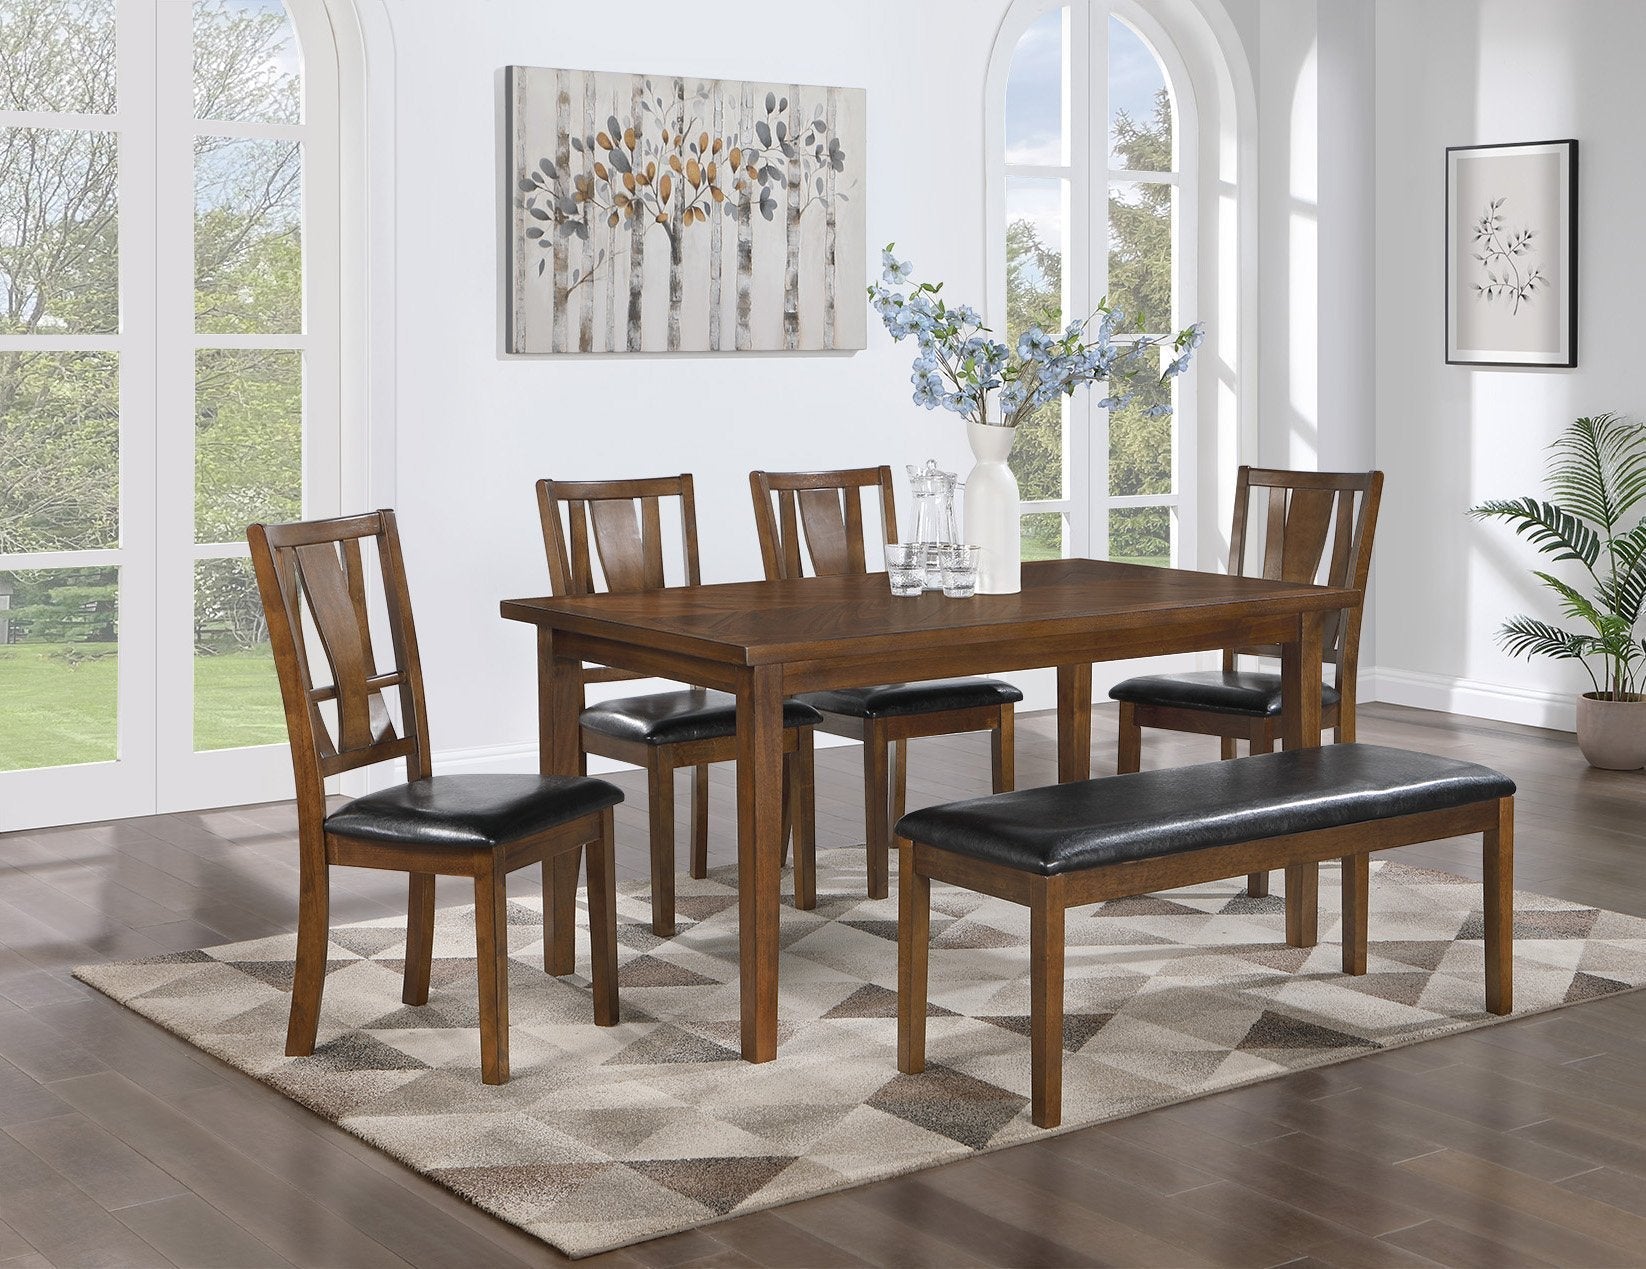 6-piece Outdoor Dining Set with Bench, Brown Cherry - Tuesday Morning-Dining Sets